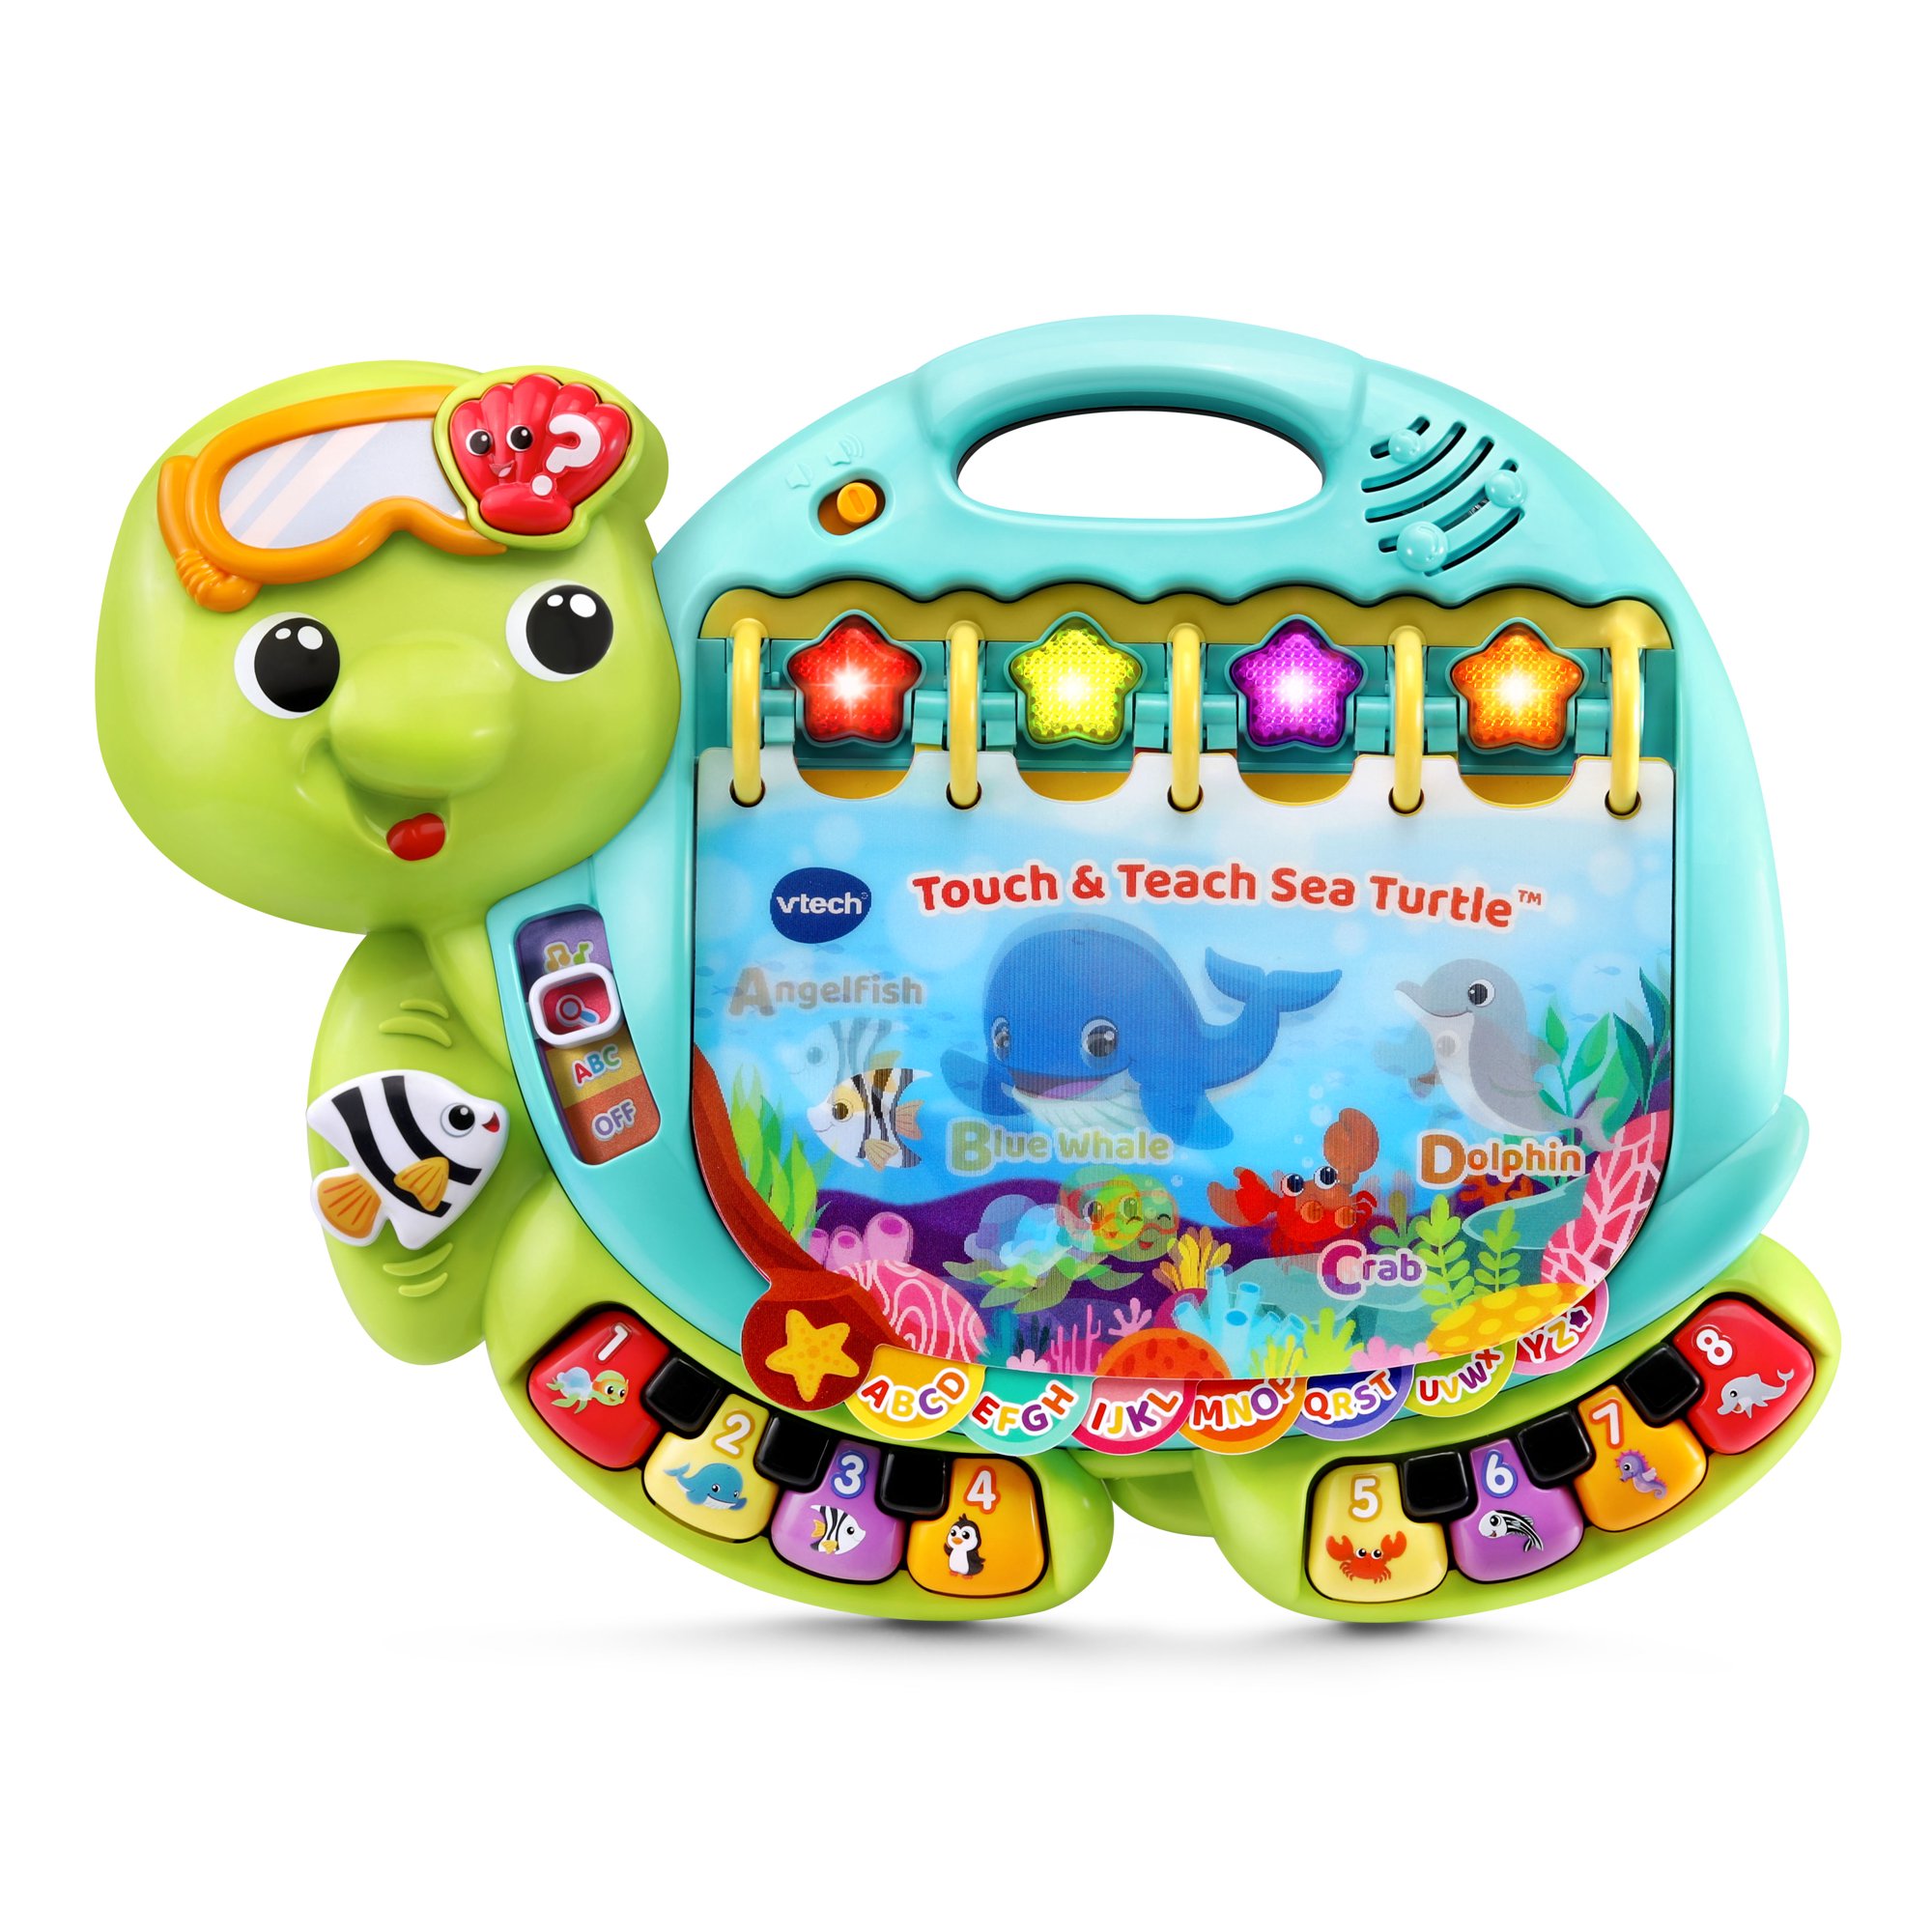 VTech Touch & Teach Sea Turtle Interactive Learning Children's Book $10 + Free Store Pickup at Walmart, FS w/ Walmart+ or FS on $35+